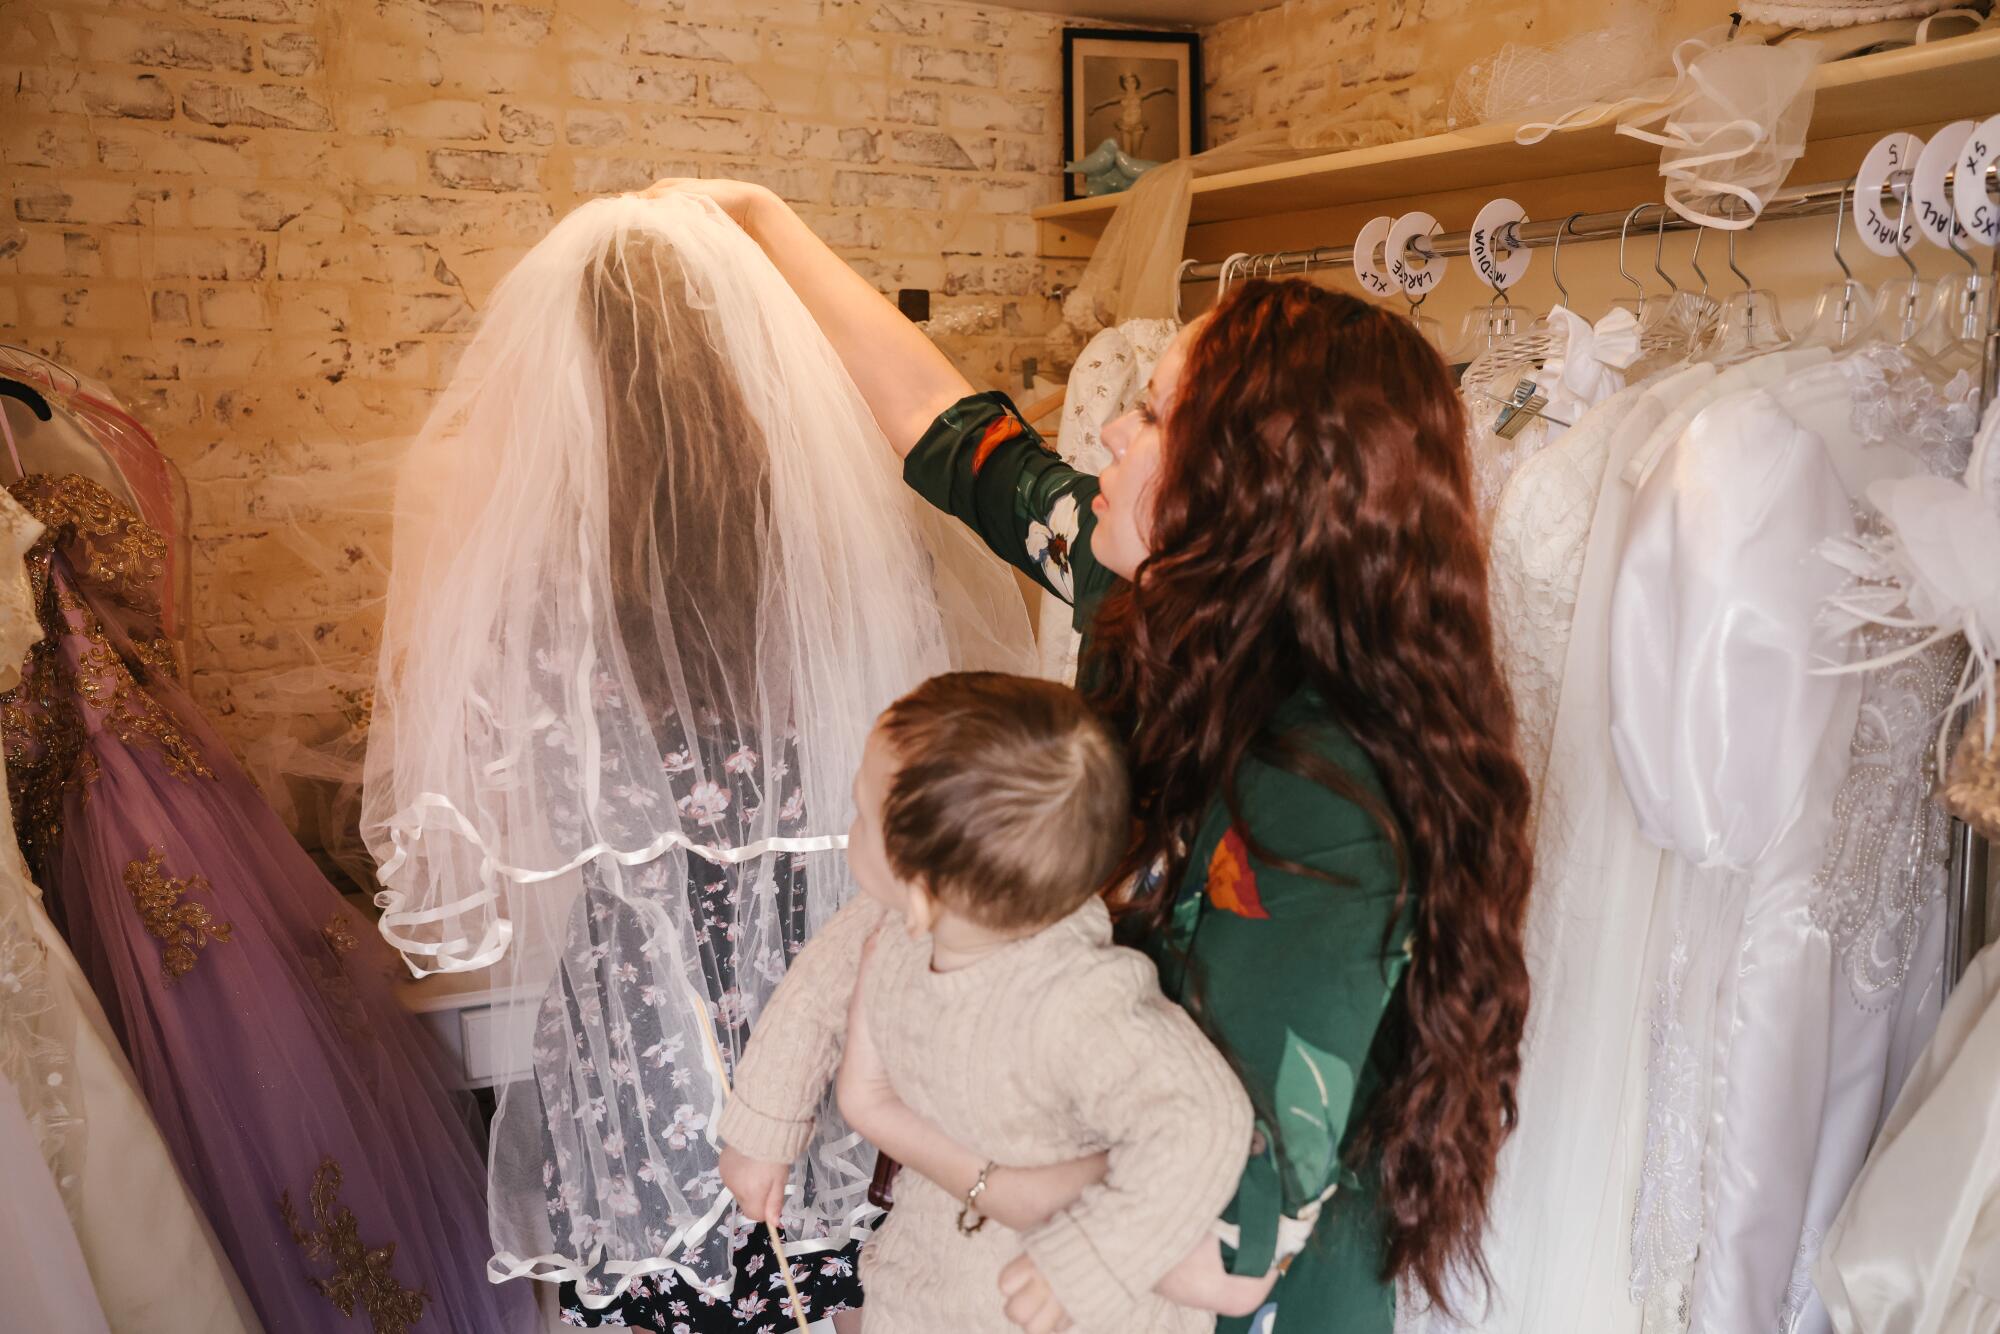 A woman holding a child helps another woman try on a veil